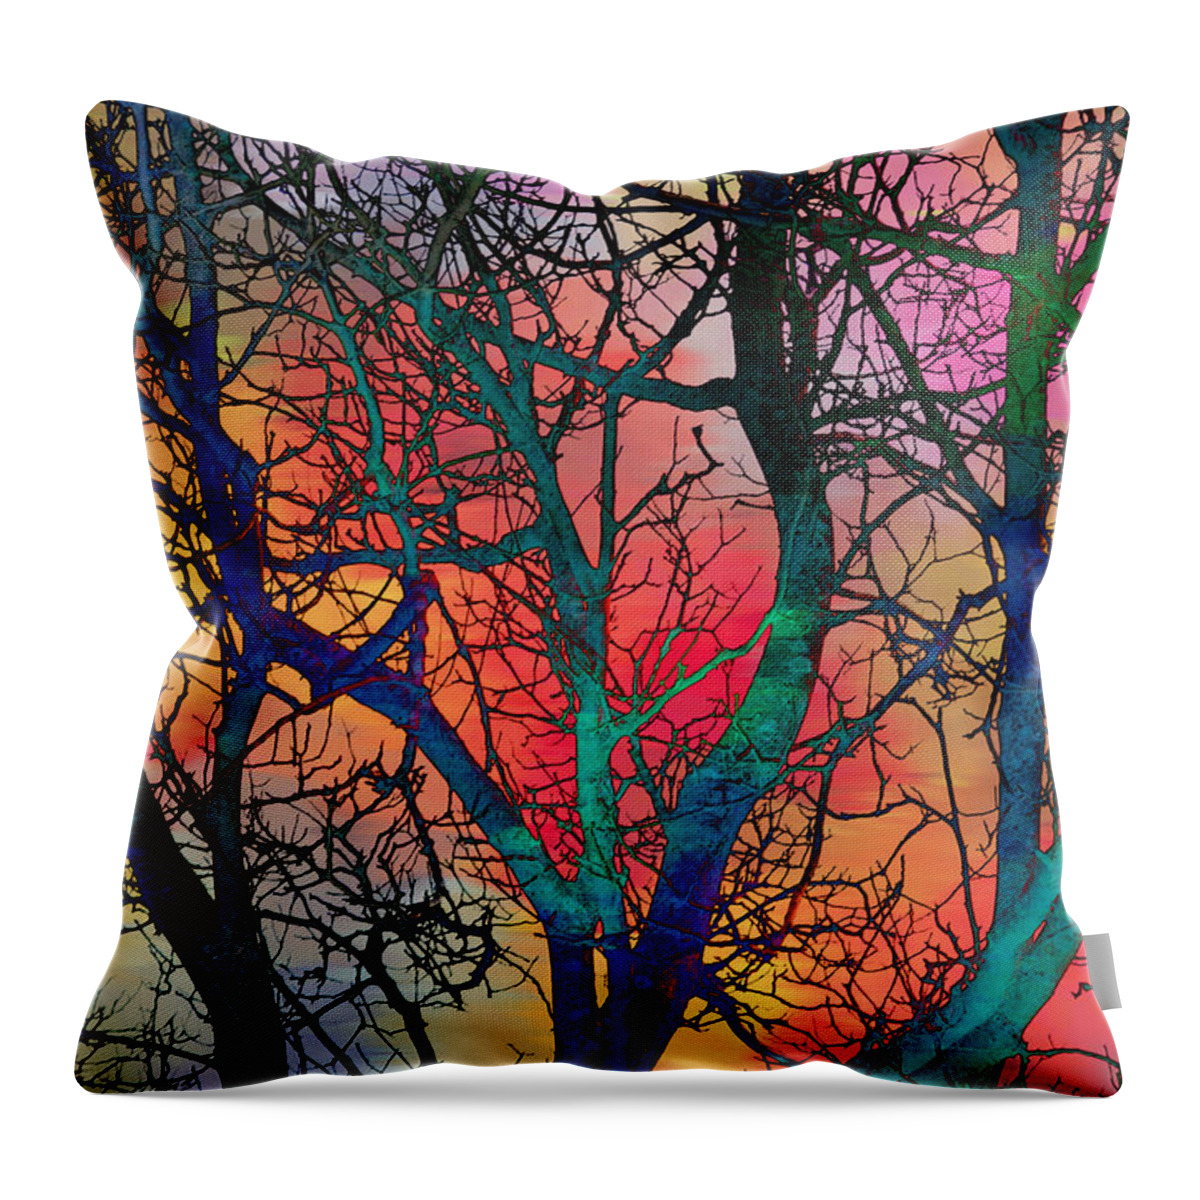 Abstract Throw Pillow featuring the digital art Dreamy Sunset by Klara Acel